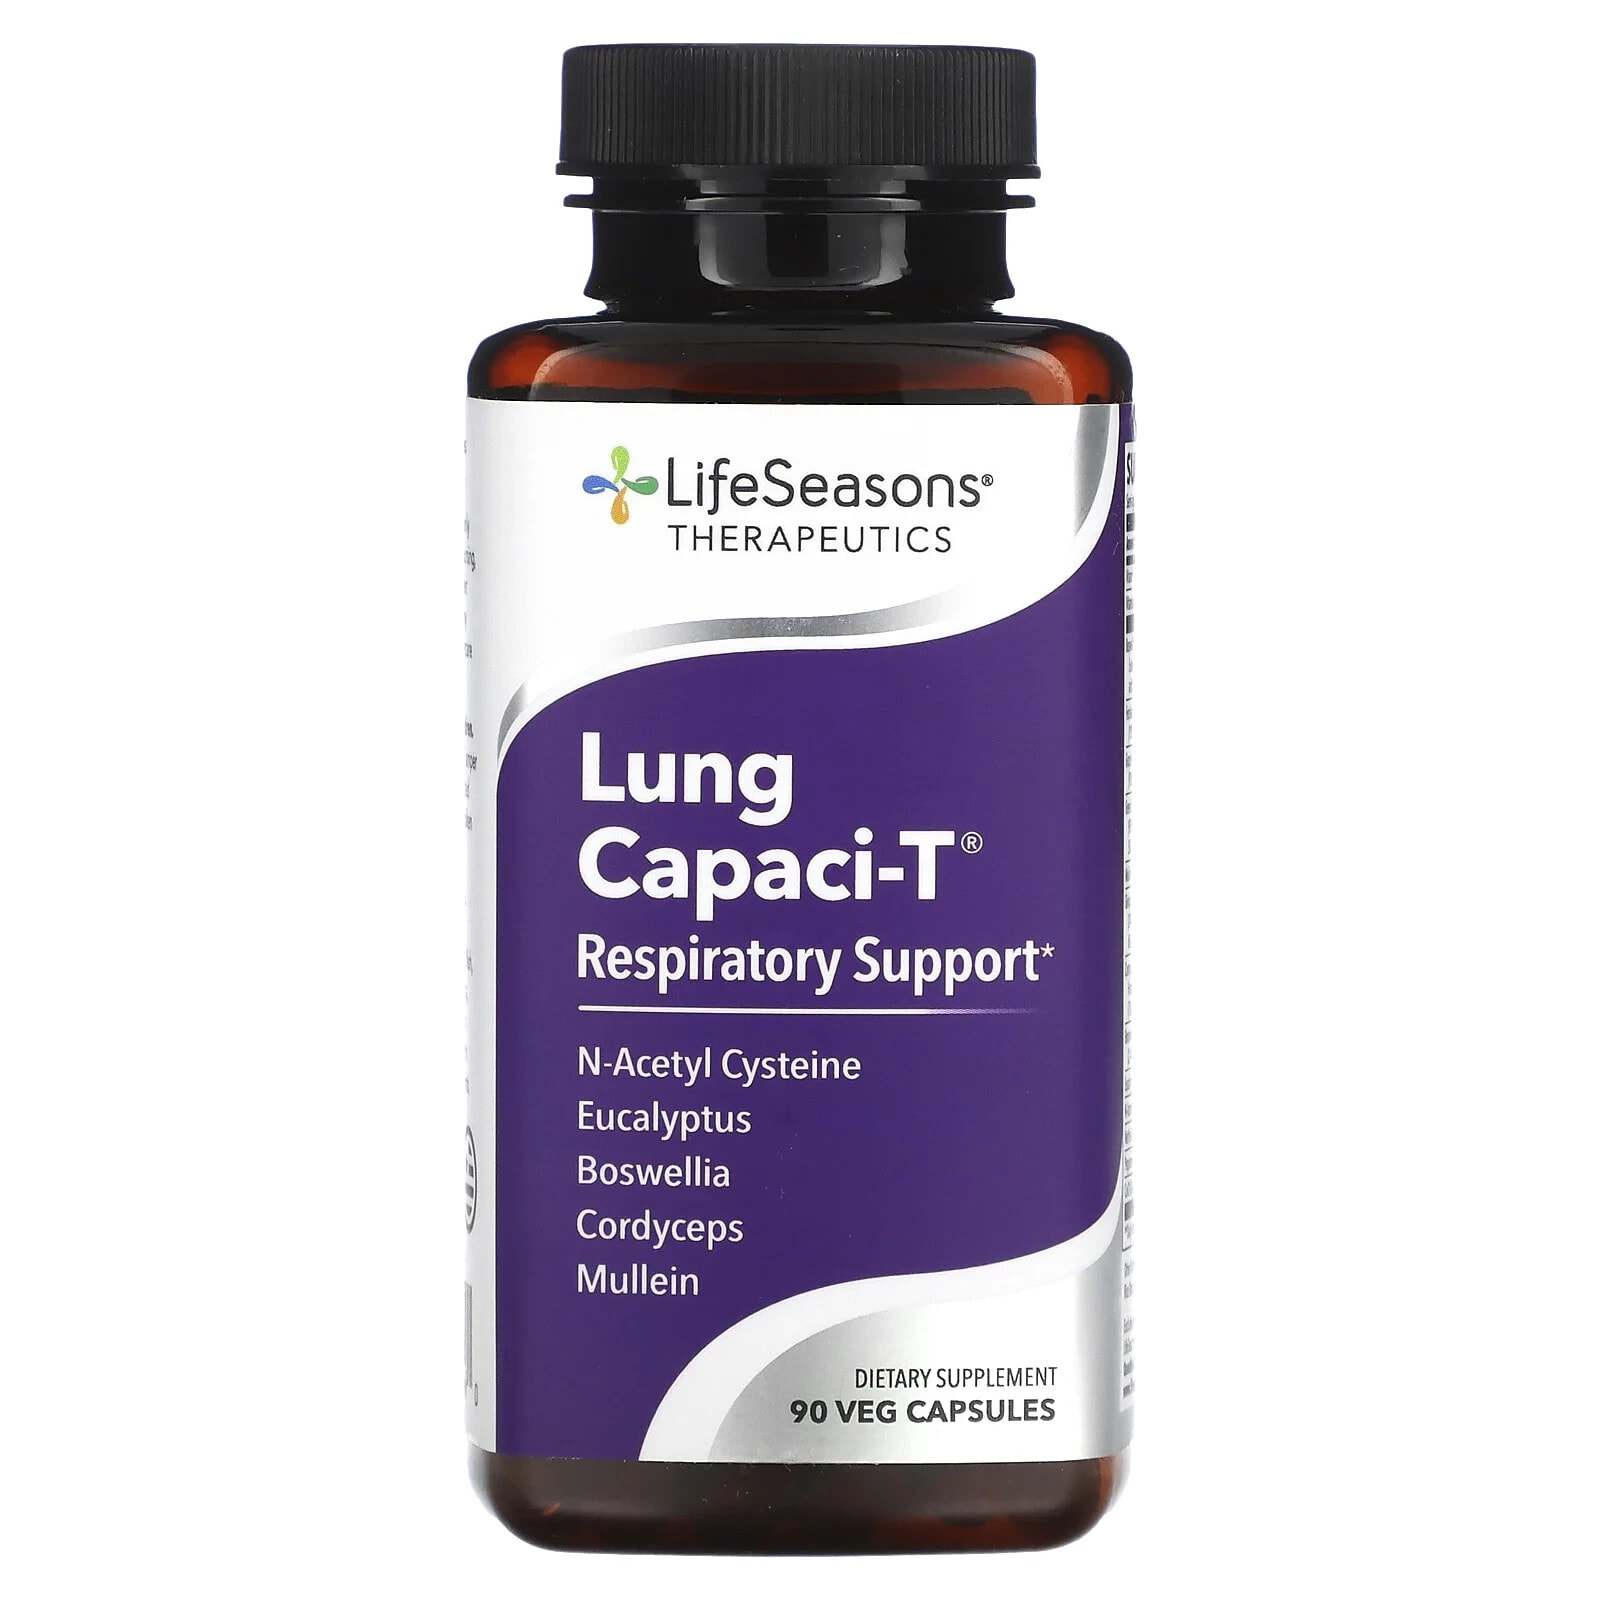 Lung Capaci-T, Respiratory Support, 90 Veg Capsules